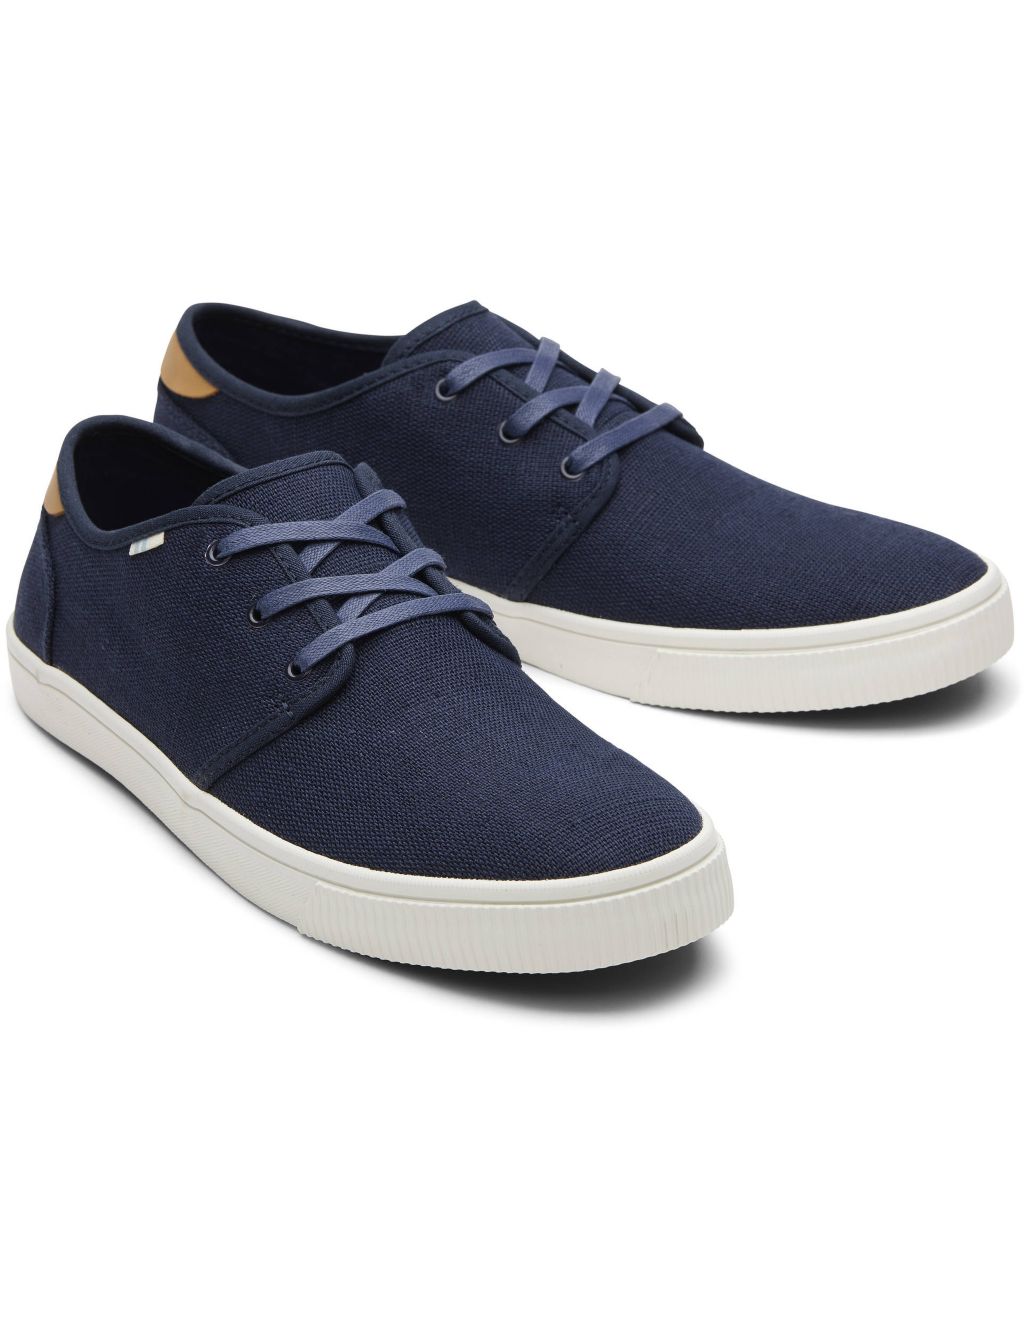 Canvas Lace Up Trainers image 2